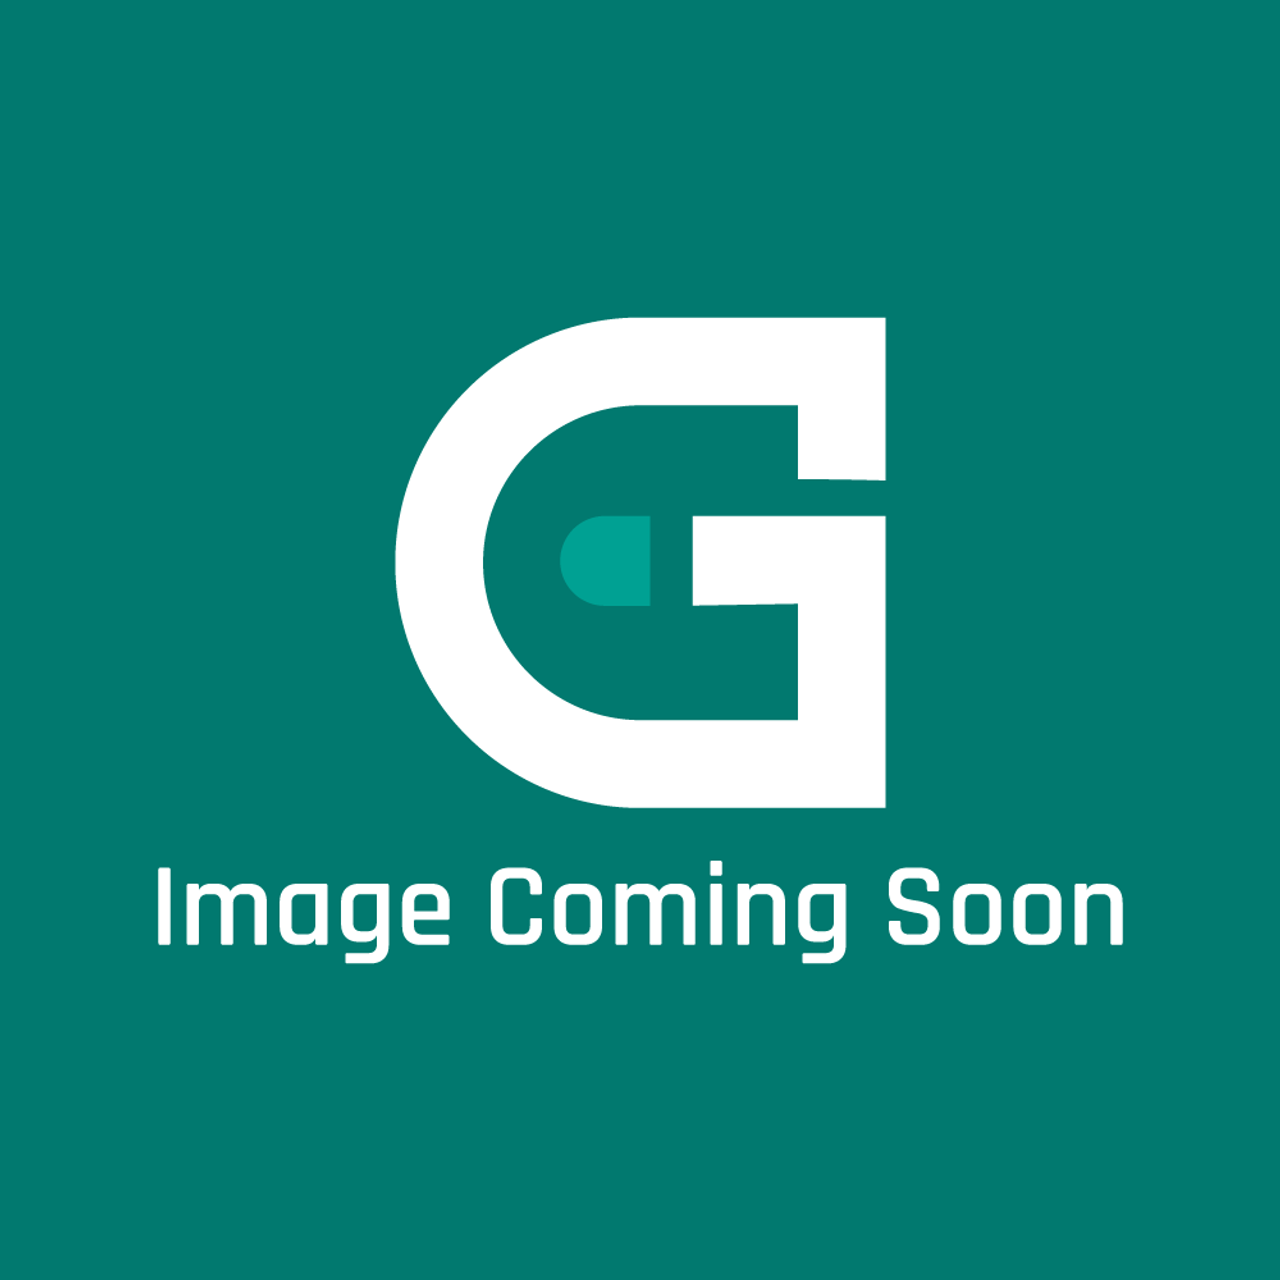 Delfield 9291331 - Label, Smoothie, Generic , 1 - Image Coming Soon!